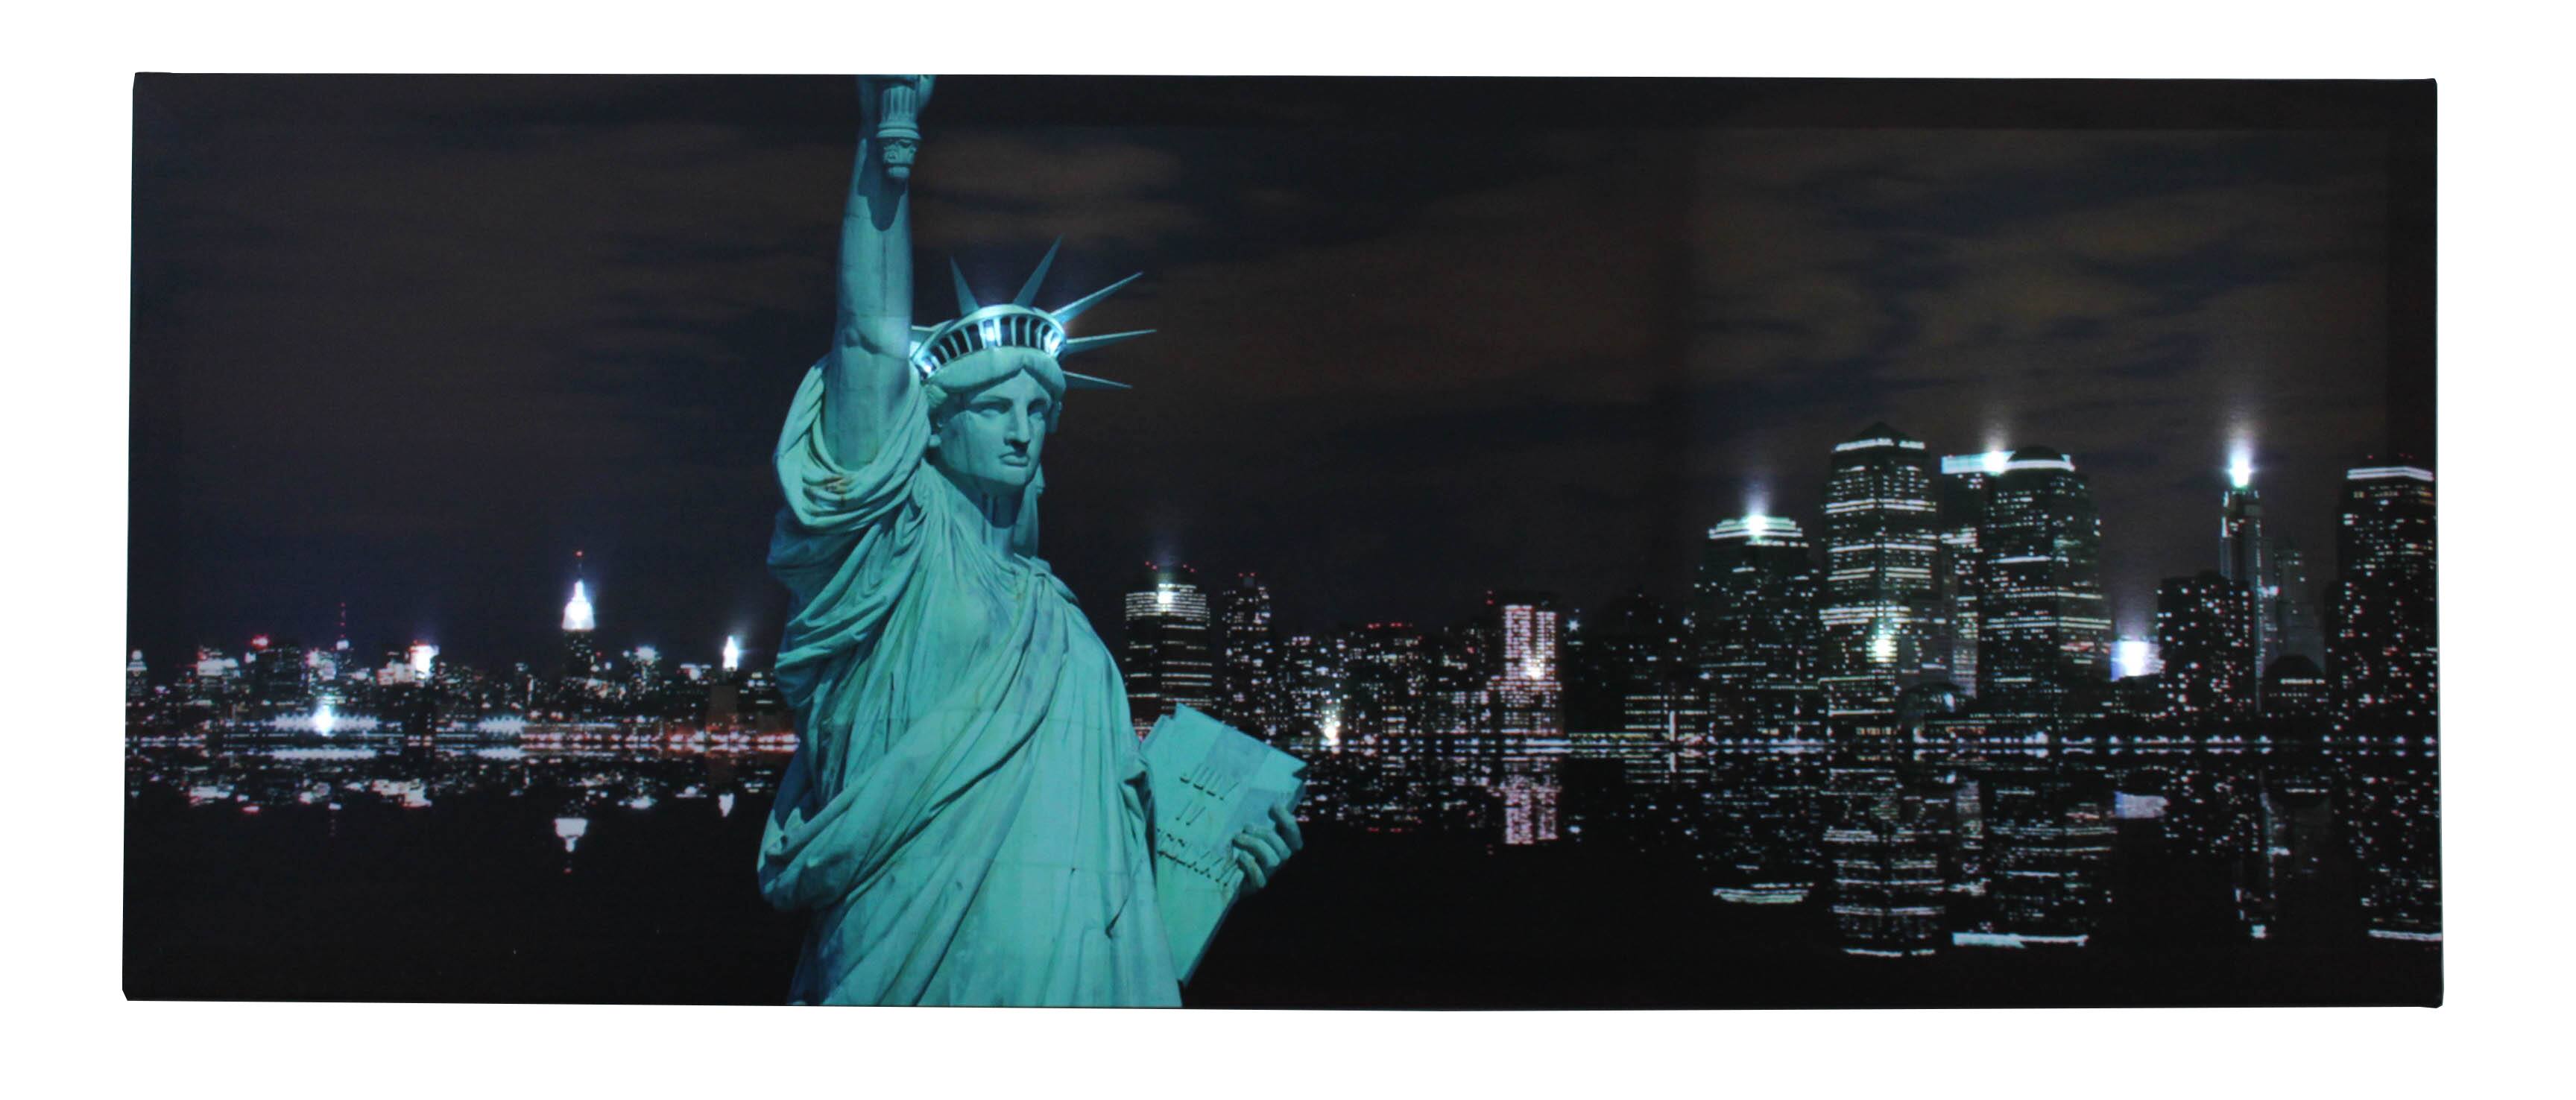 6" Statue of Liberty Figurine w.Flag Base and New York City SKYLines from NYC 